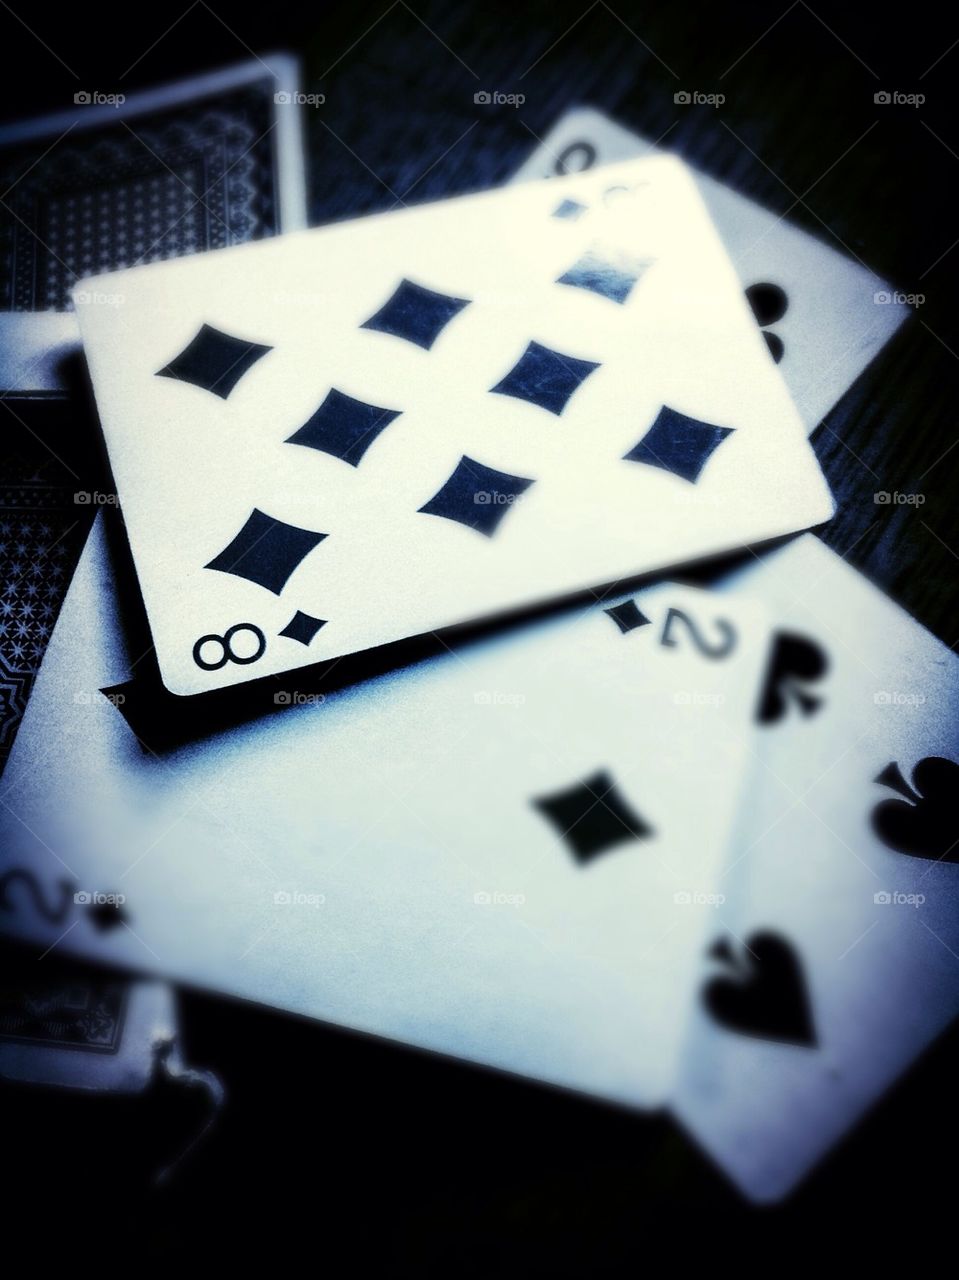 Deck of card